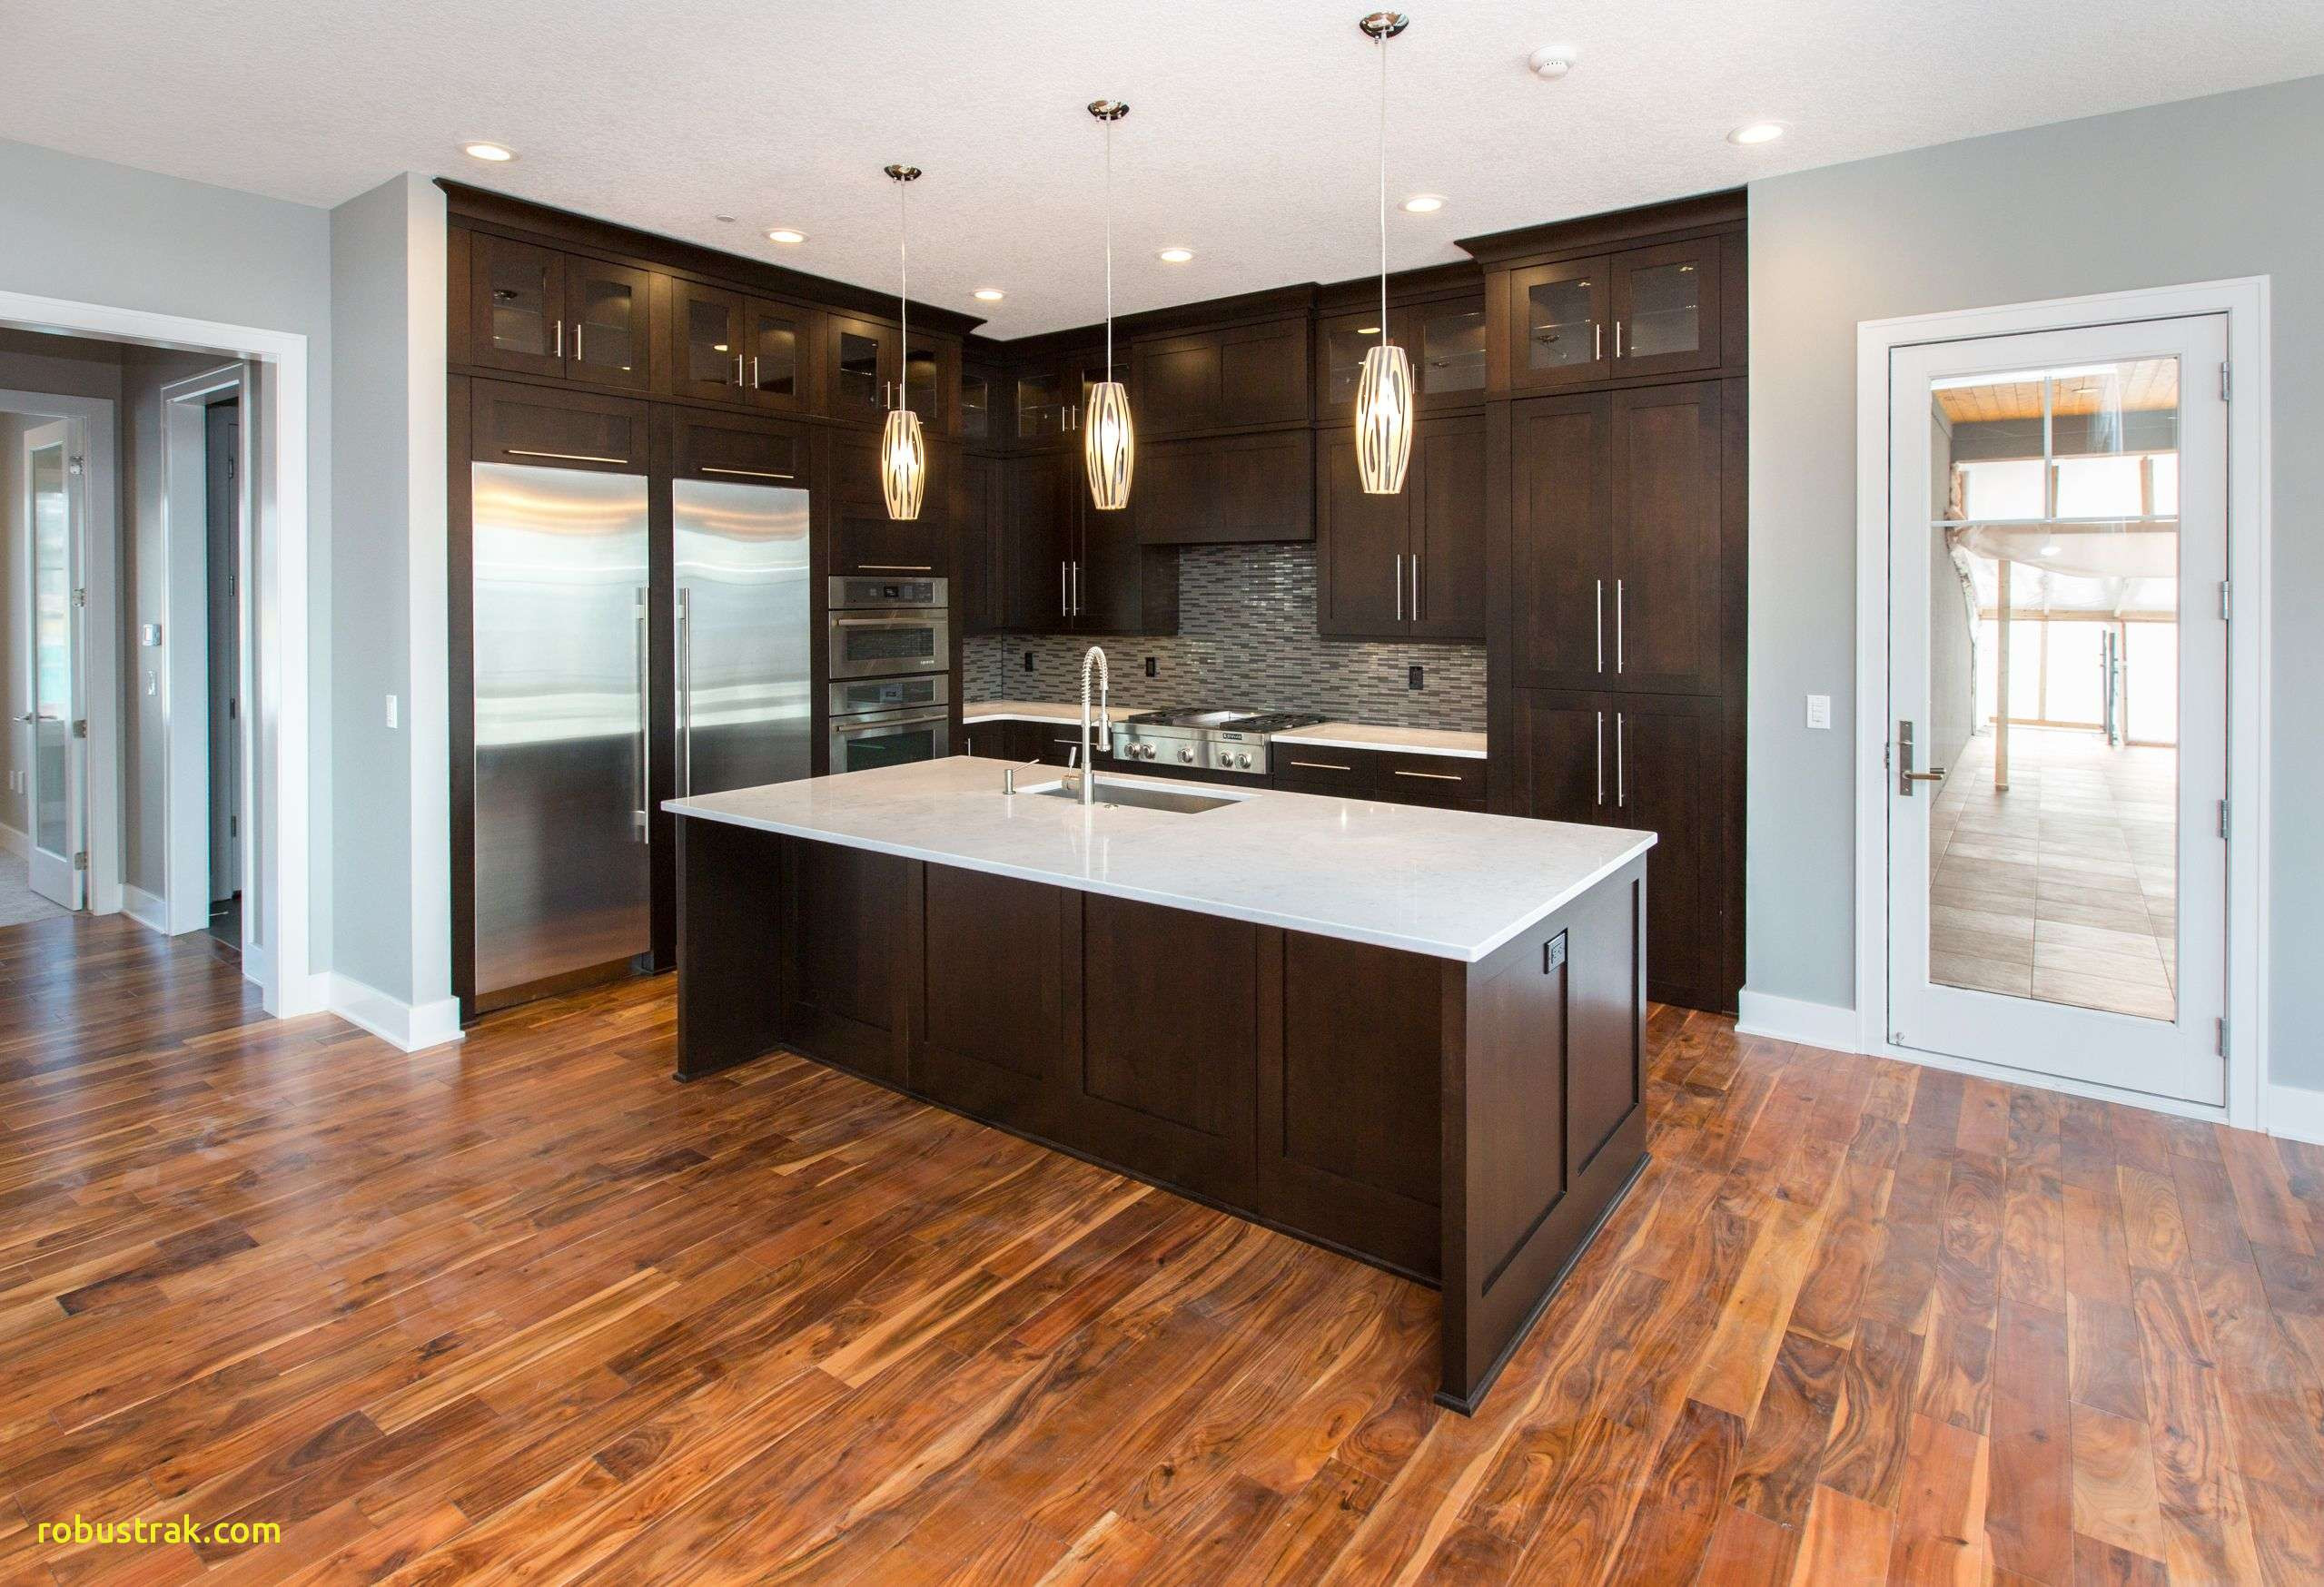 pictures of acacia hardwood floors of fresh laminate flooring with dark cabinets home design ideas intended for love this modern look dark kitchen cabinets light fixtures white trim acacia